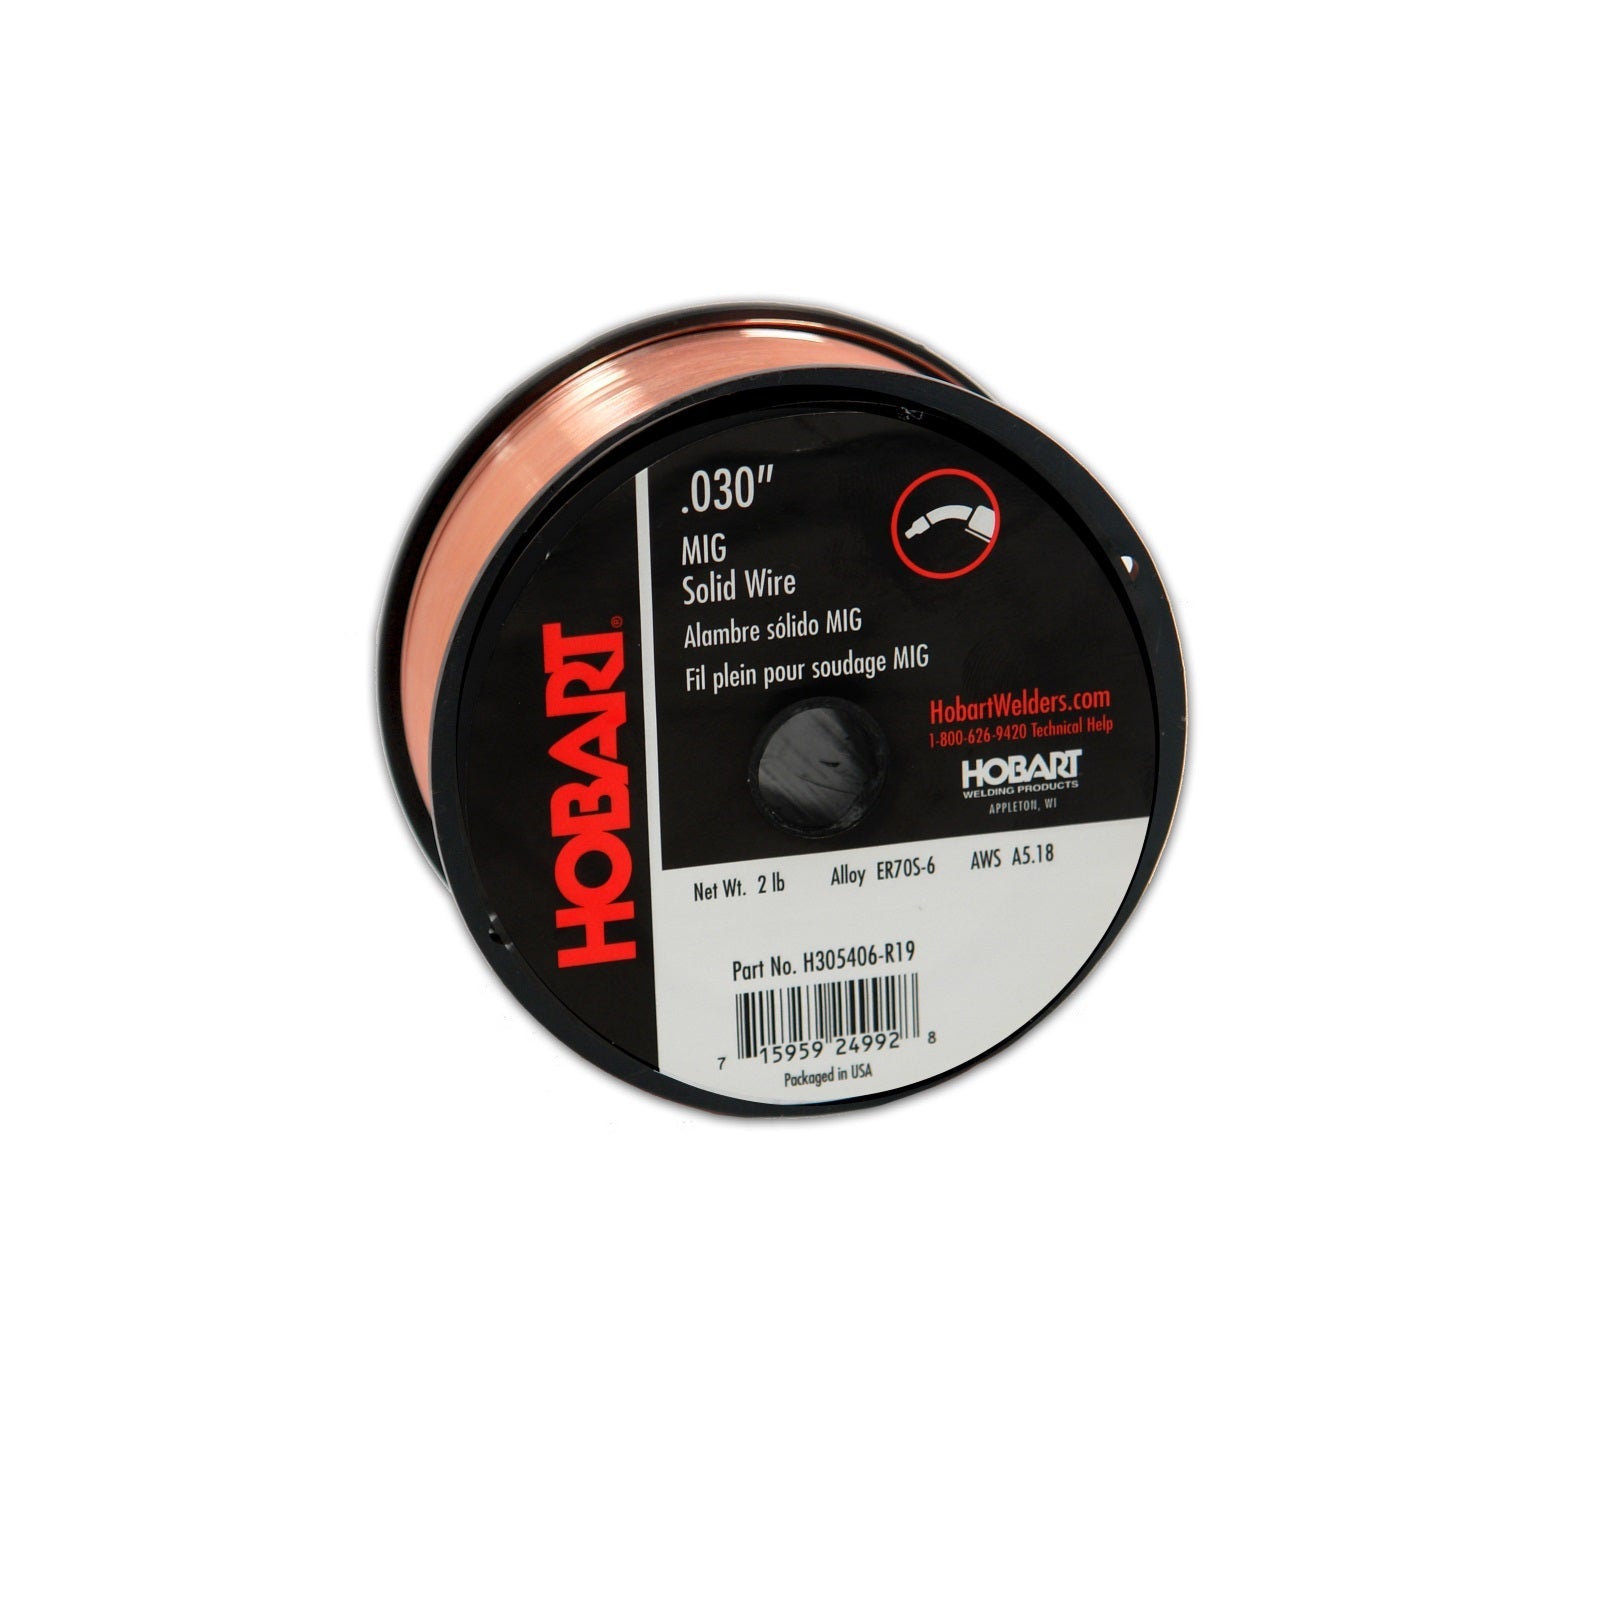 Hobart ER 70S6 MIG Wire .030 X 2 Lb (4") Spool